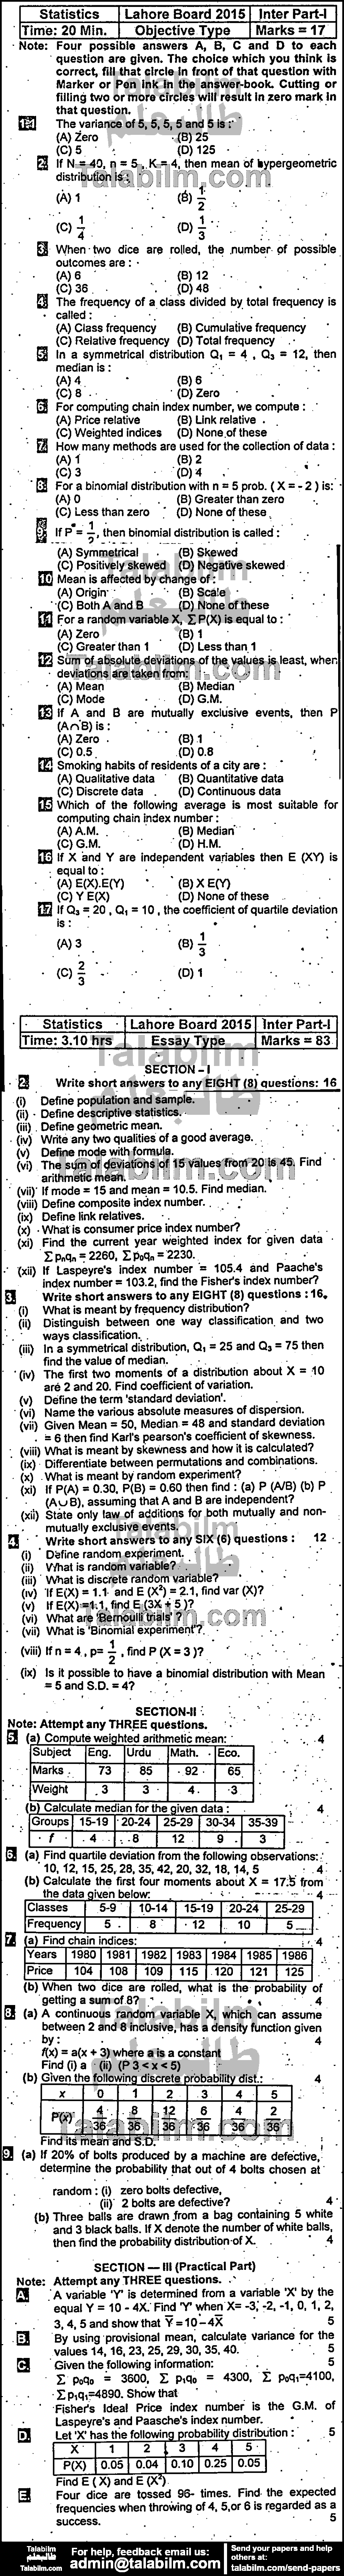 Statistics 0 past paper for Group-I 2015